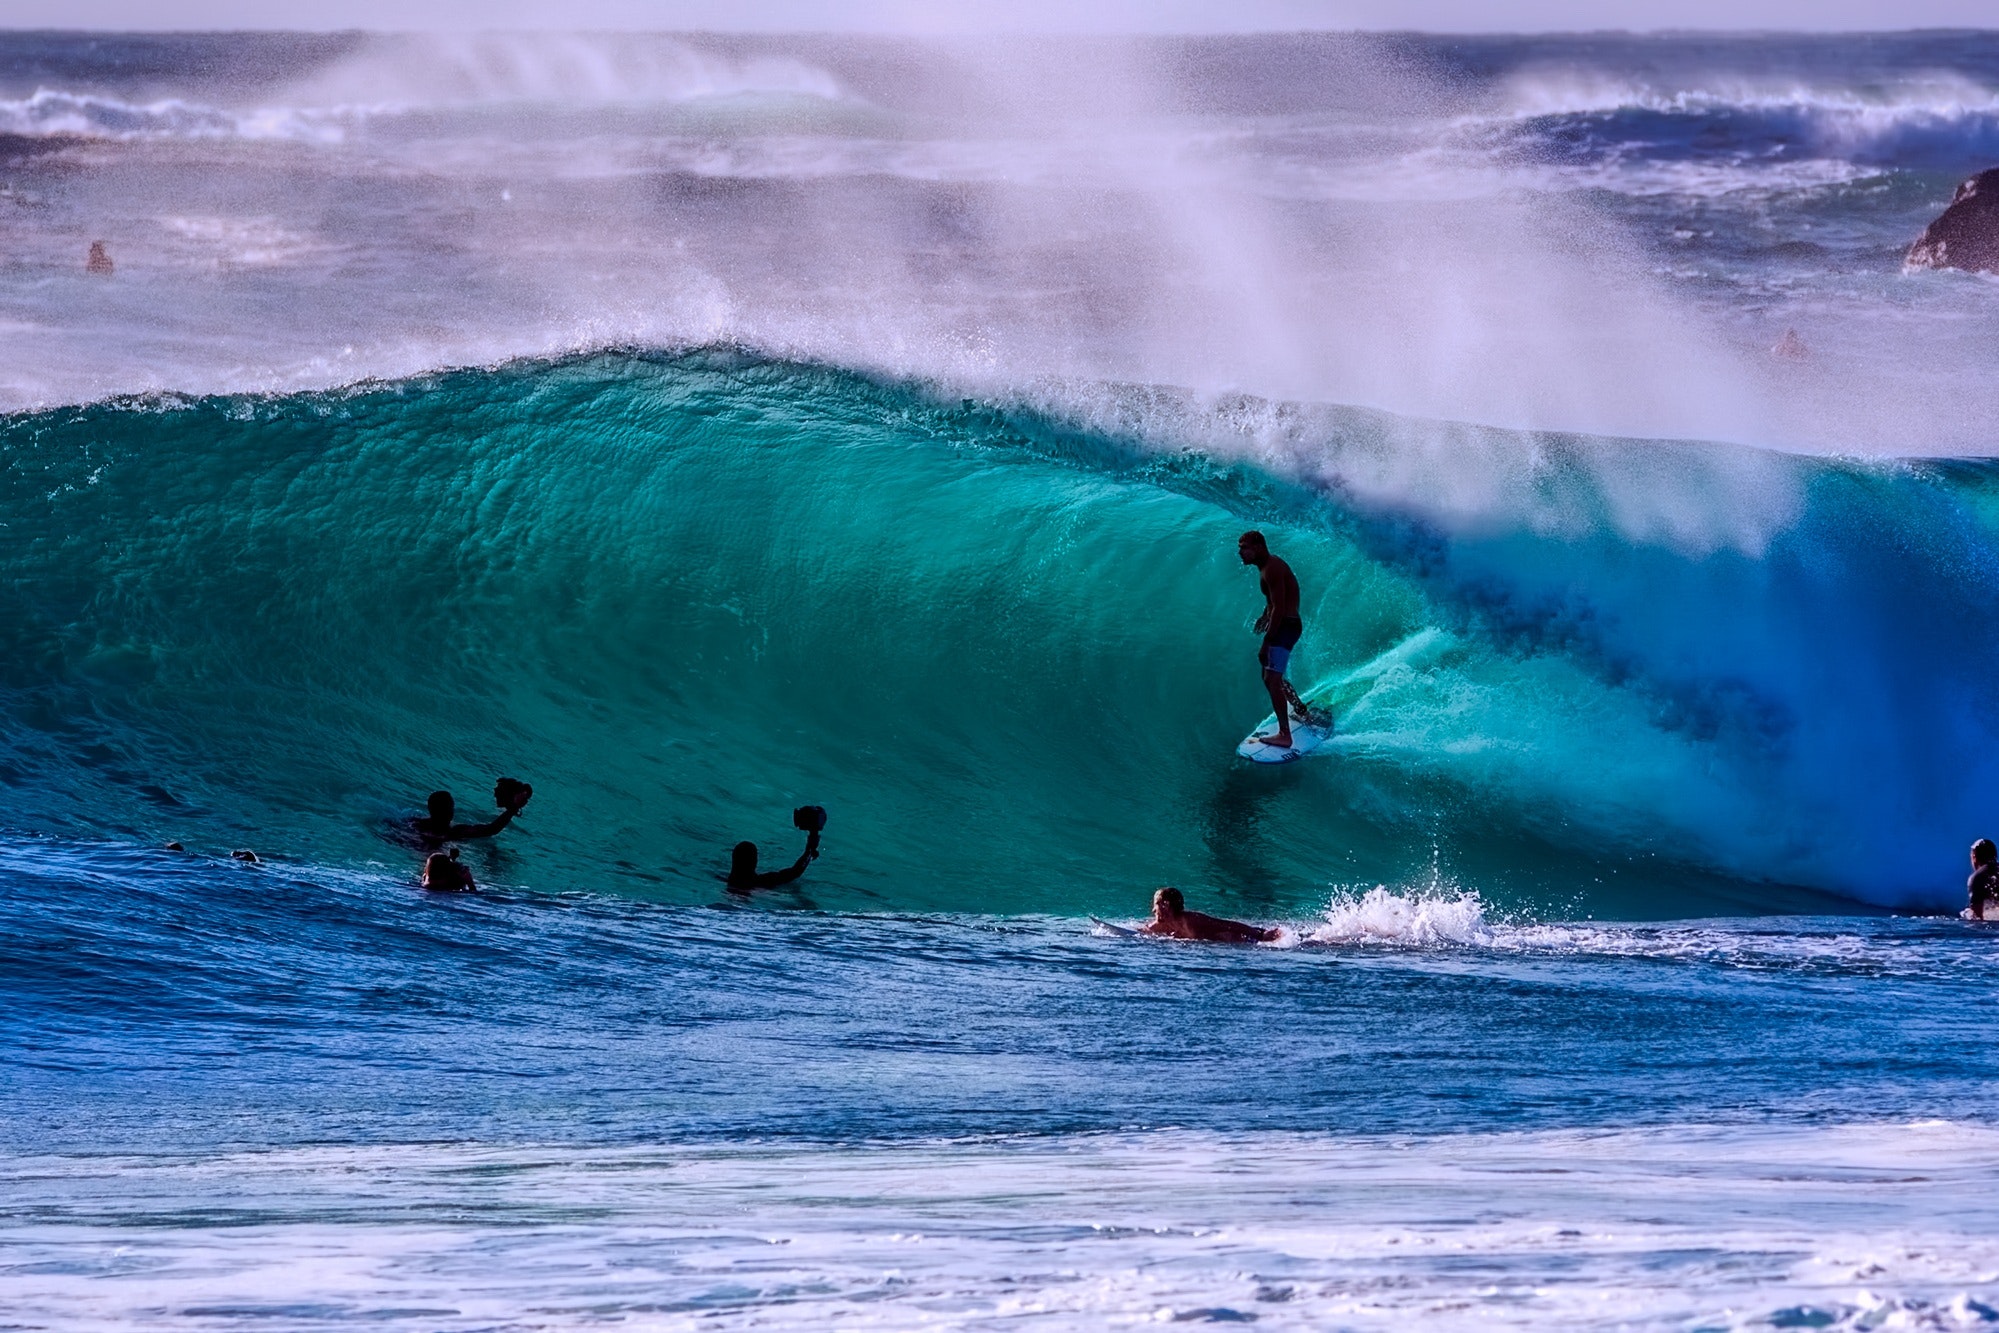 Surfer riding a wave with other surfers and photographers in the water